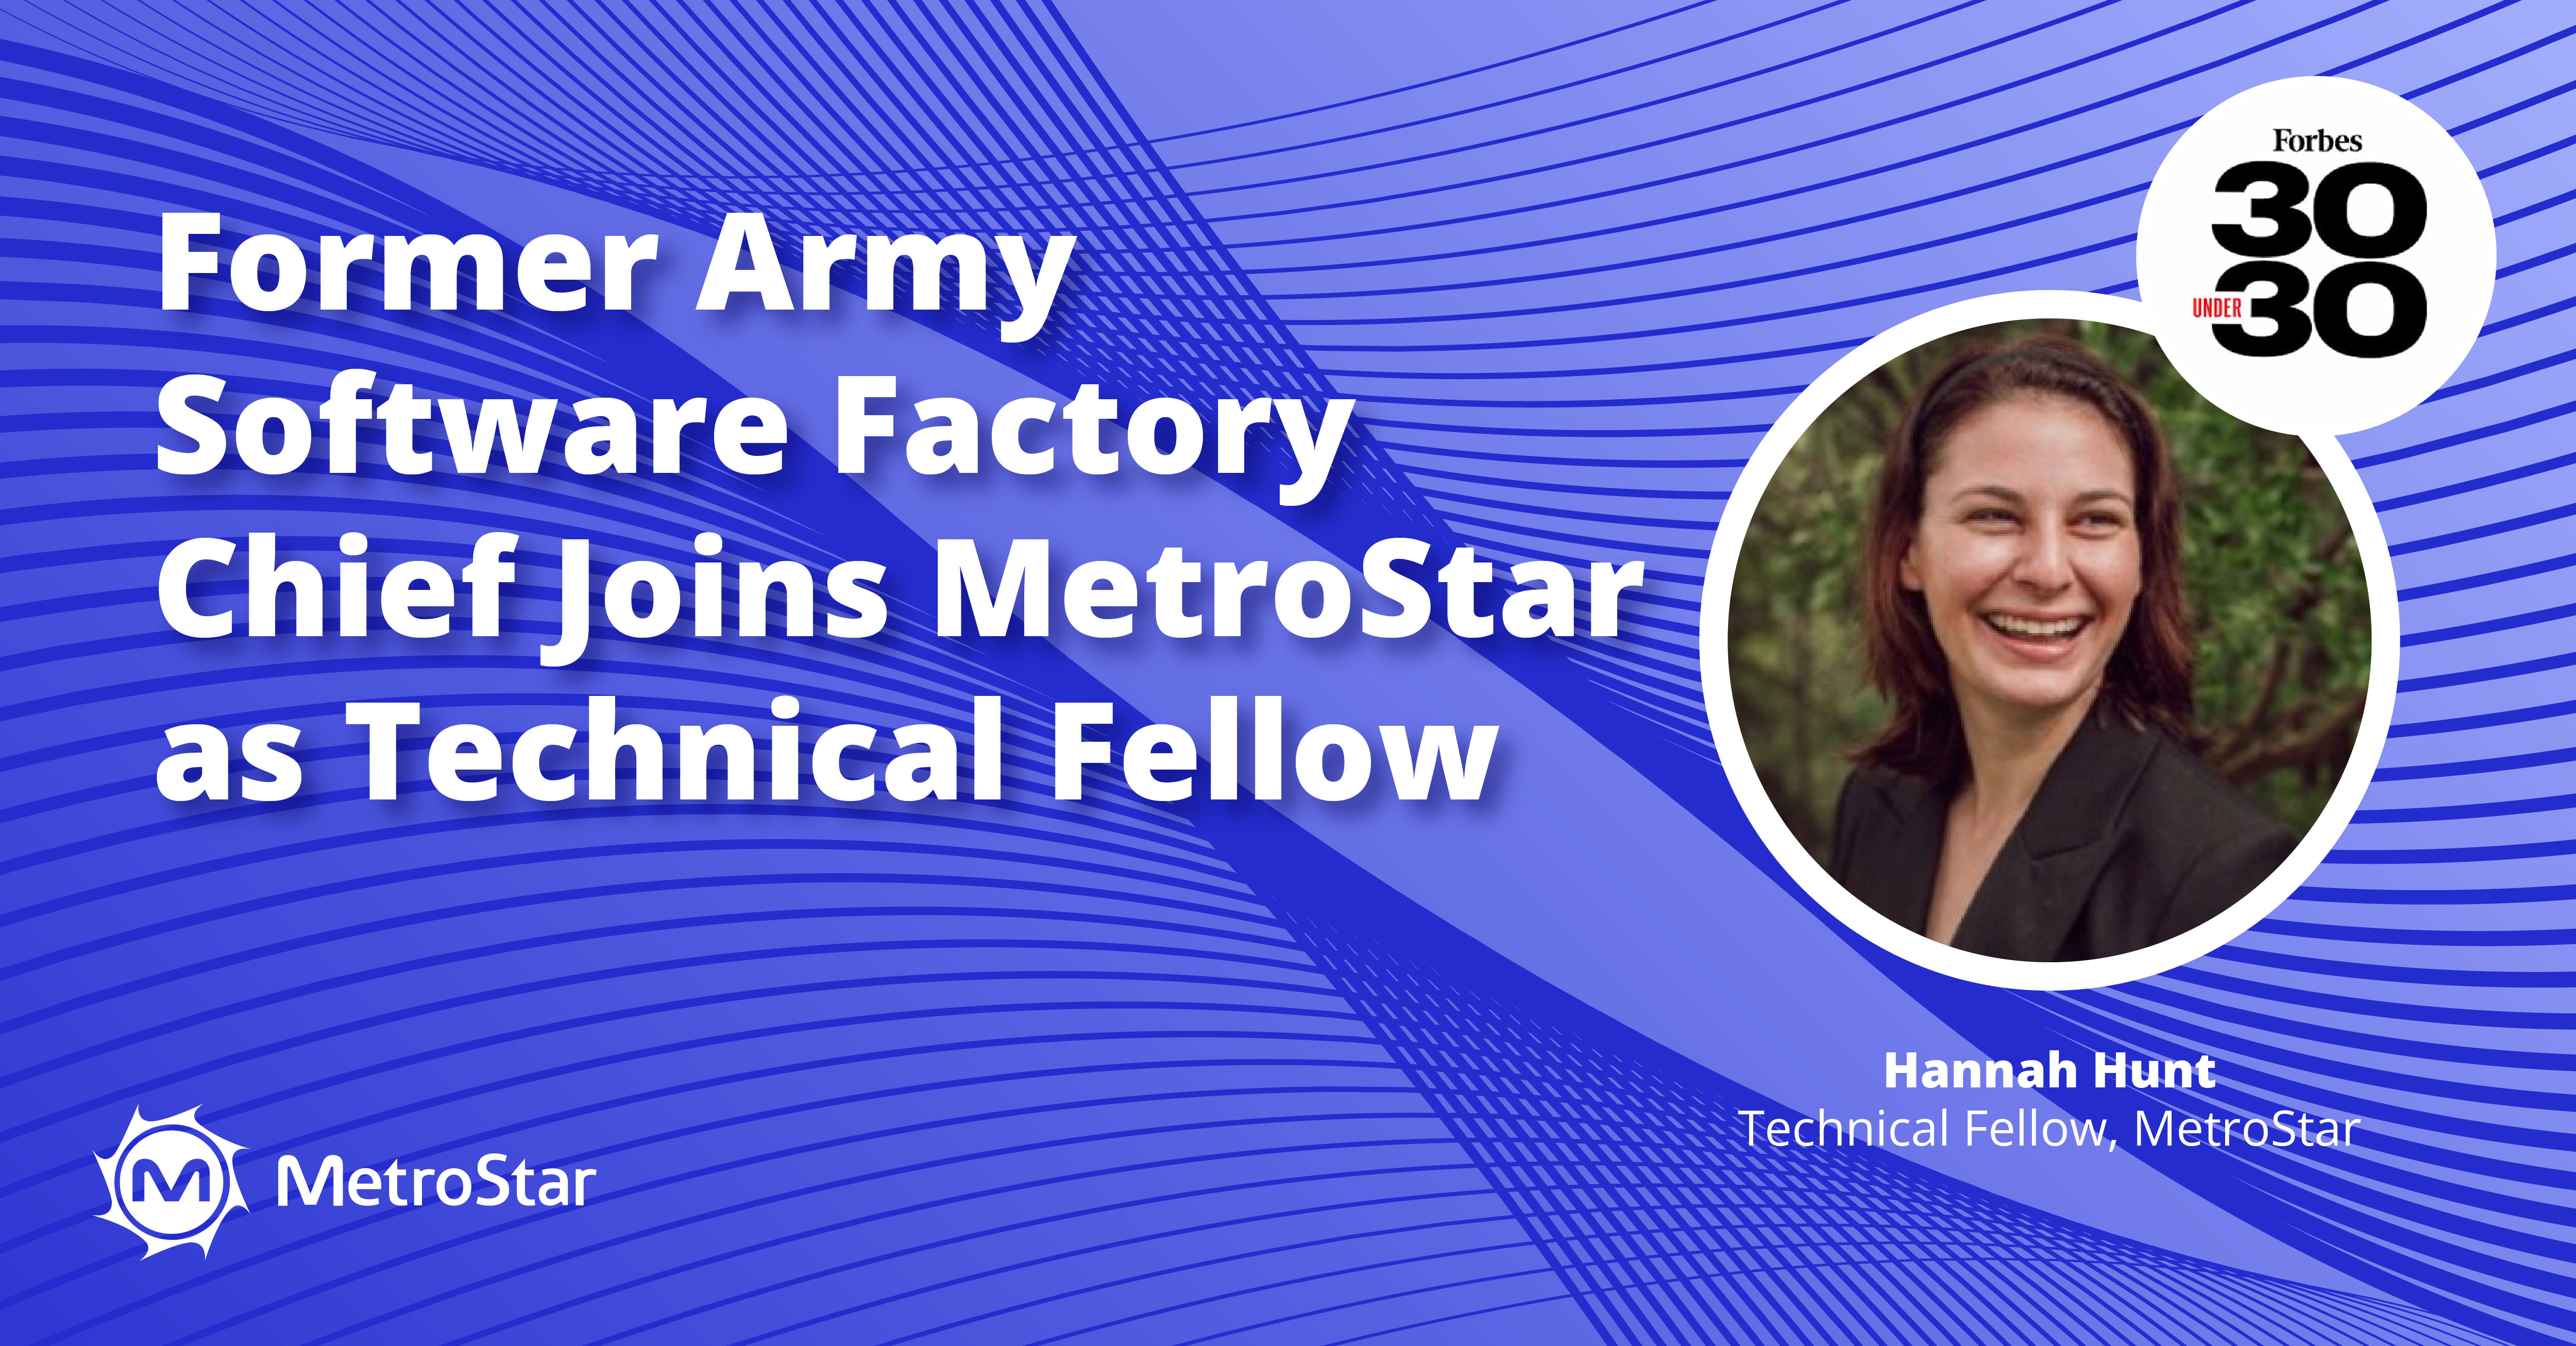 Former Army Software Factory Chief Joins MetroStar as Tech Fellow